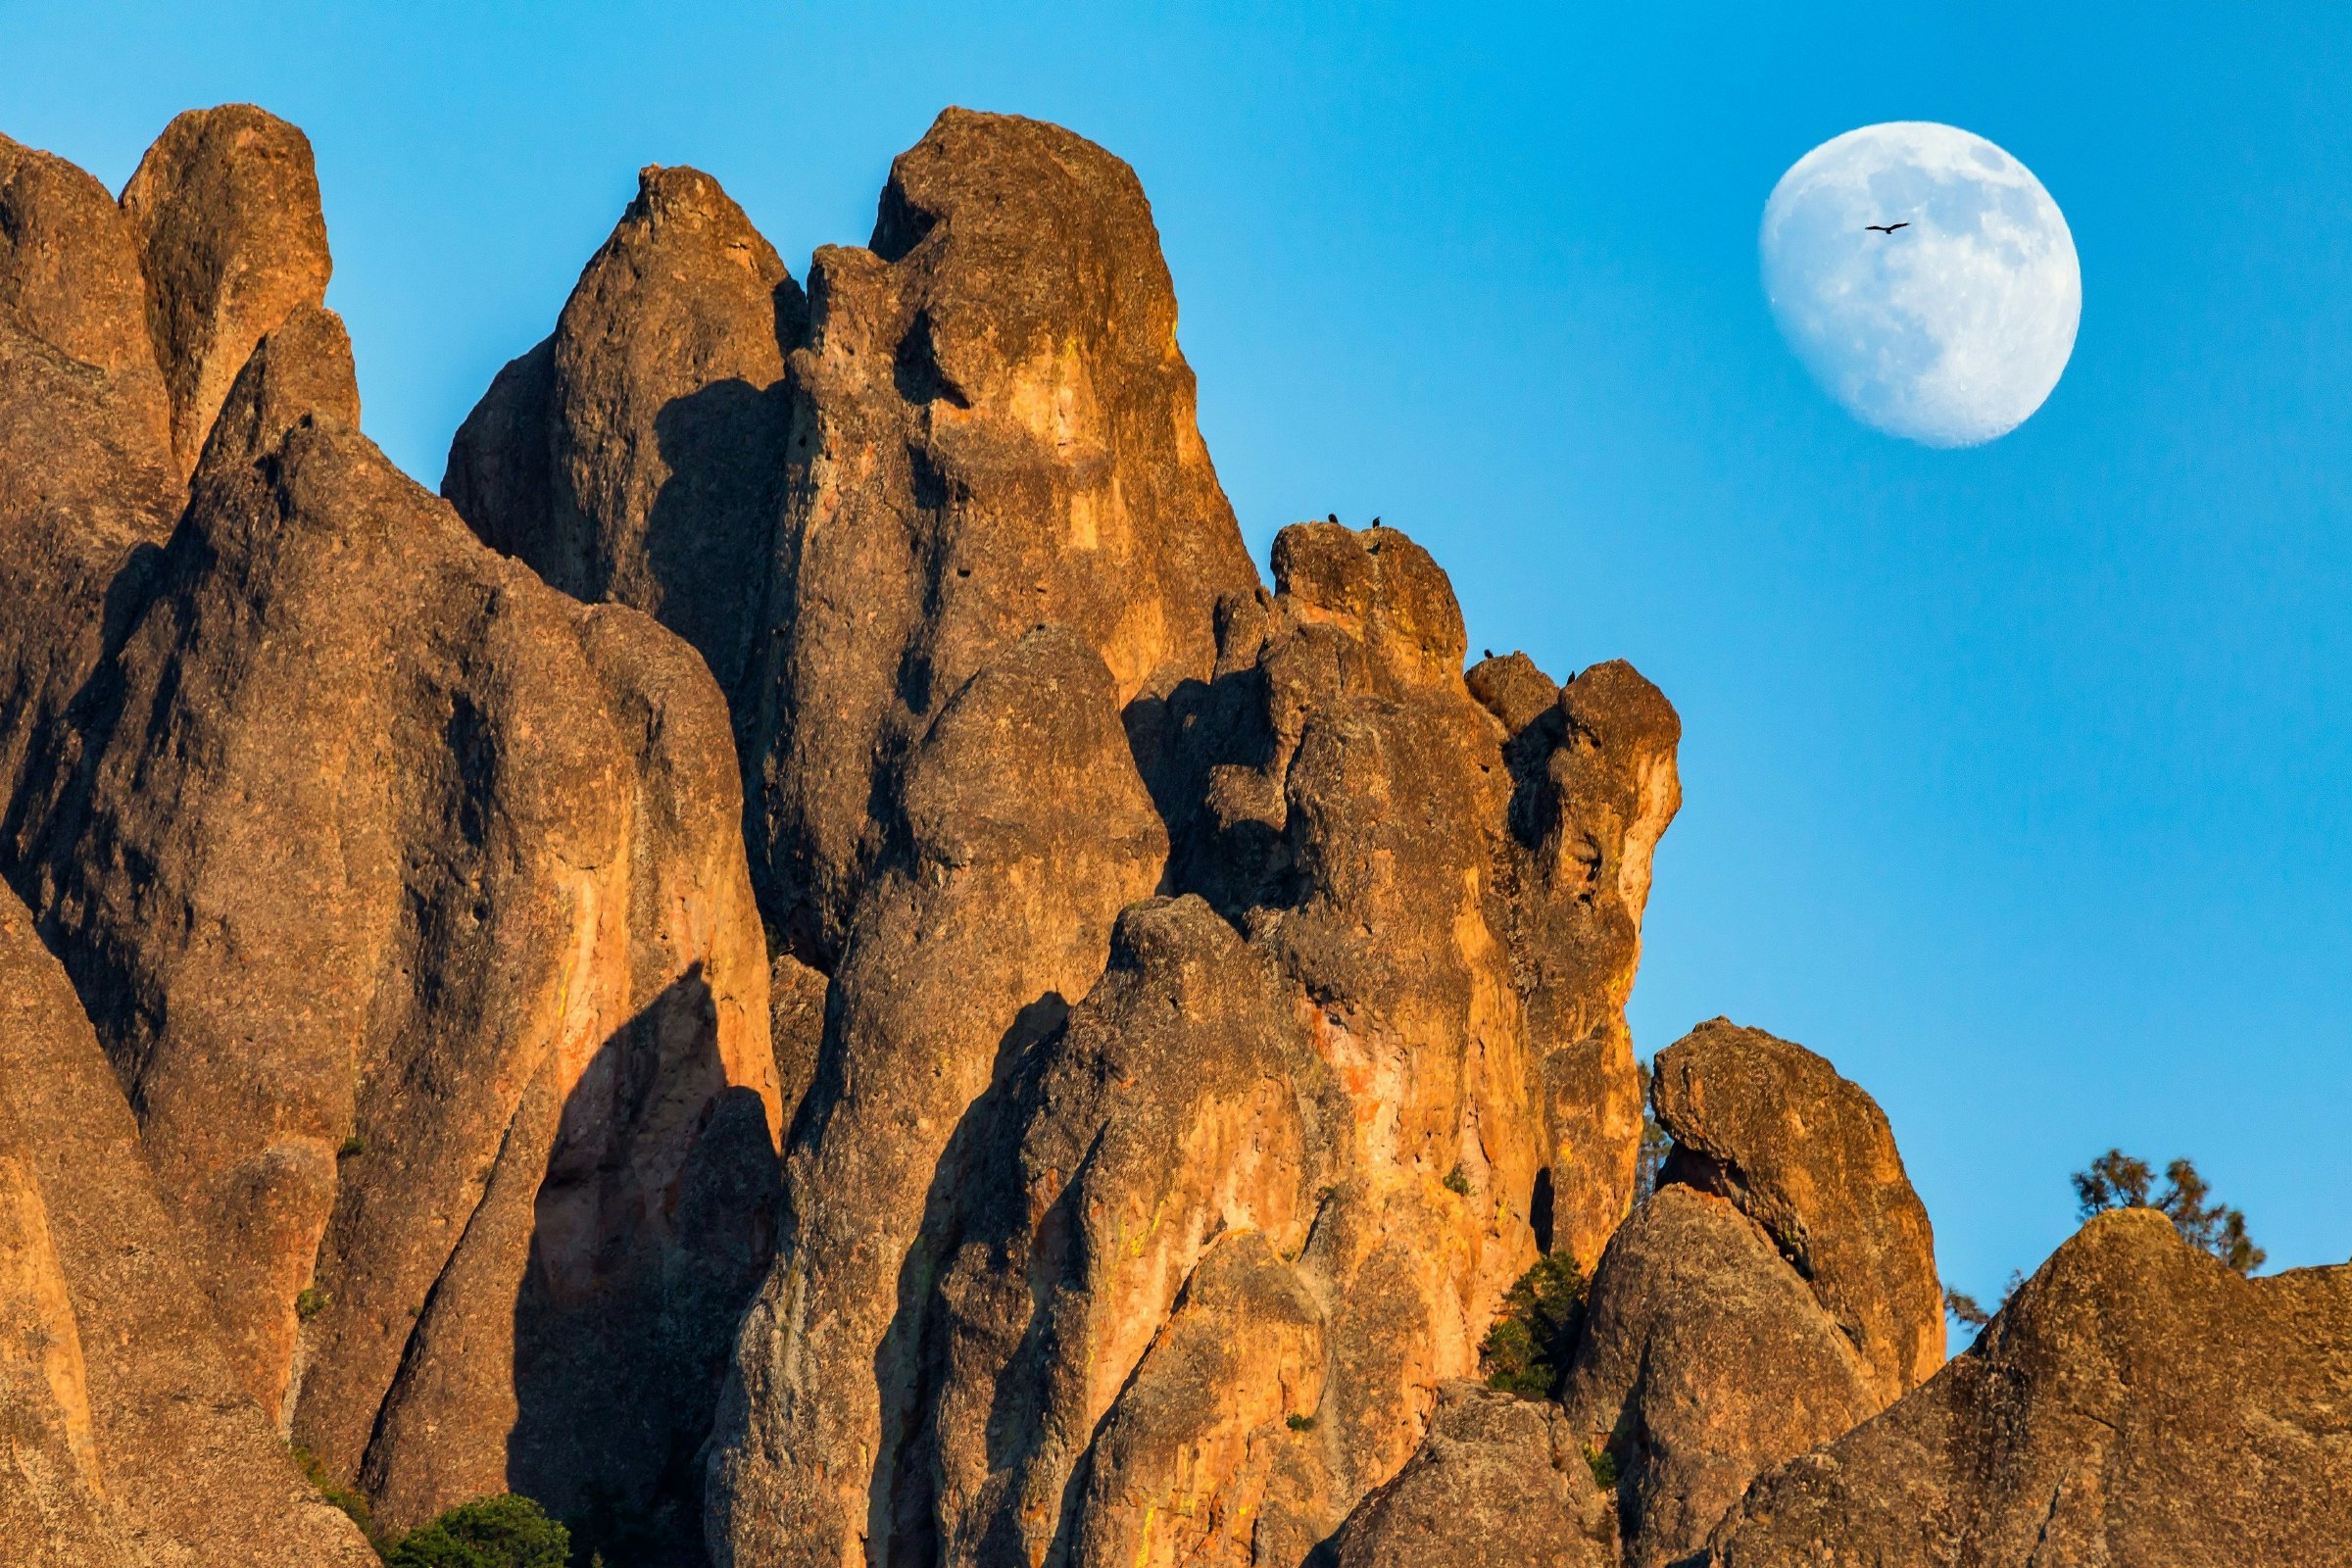 Large orange-brown rocky outcrops dominate the shot. A bird is silhouetted against the moon in a blue sky